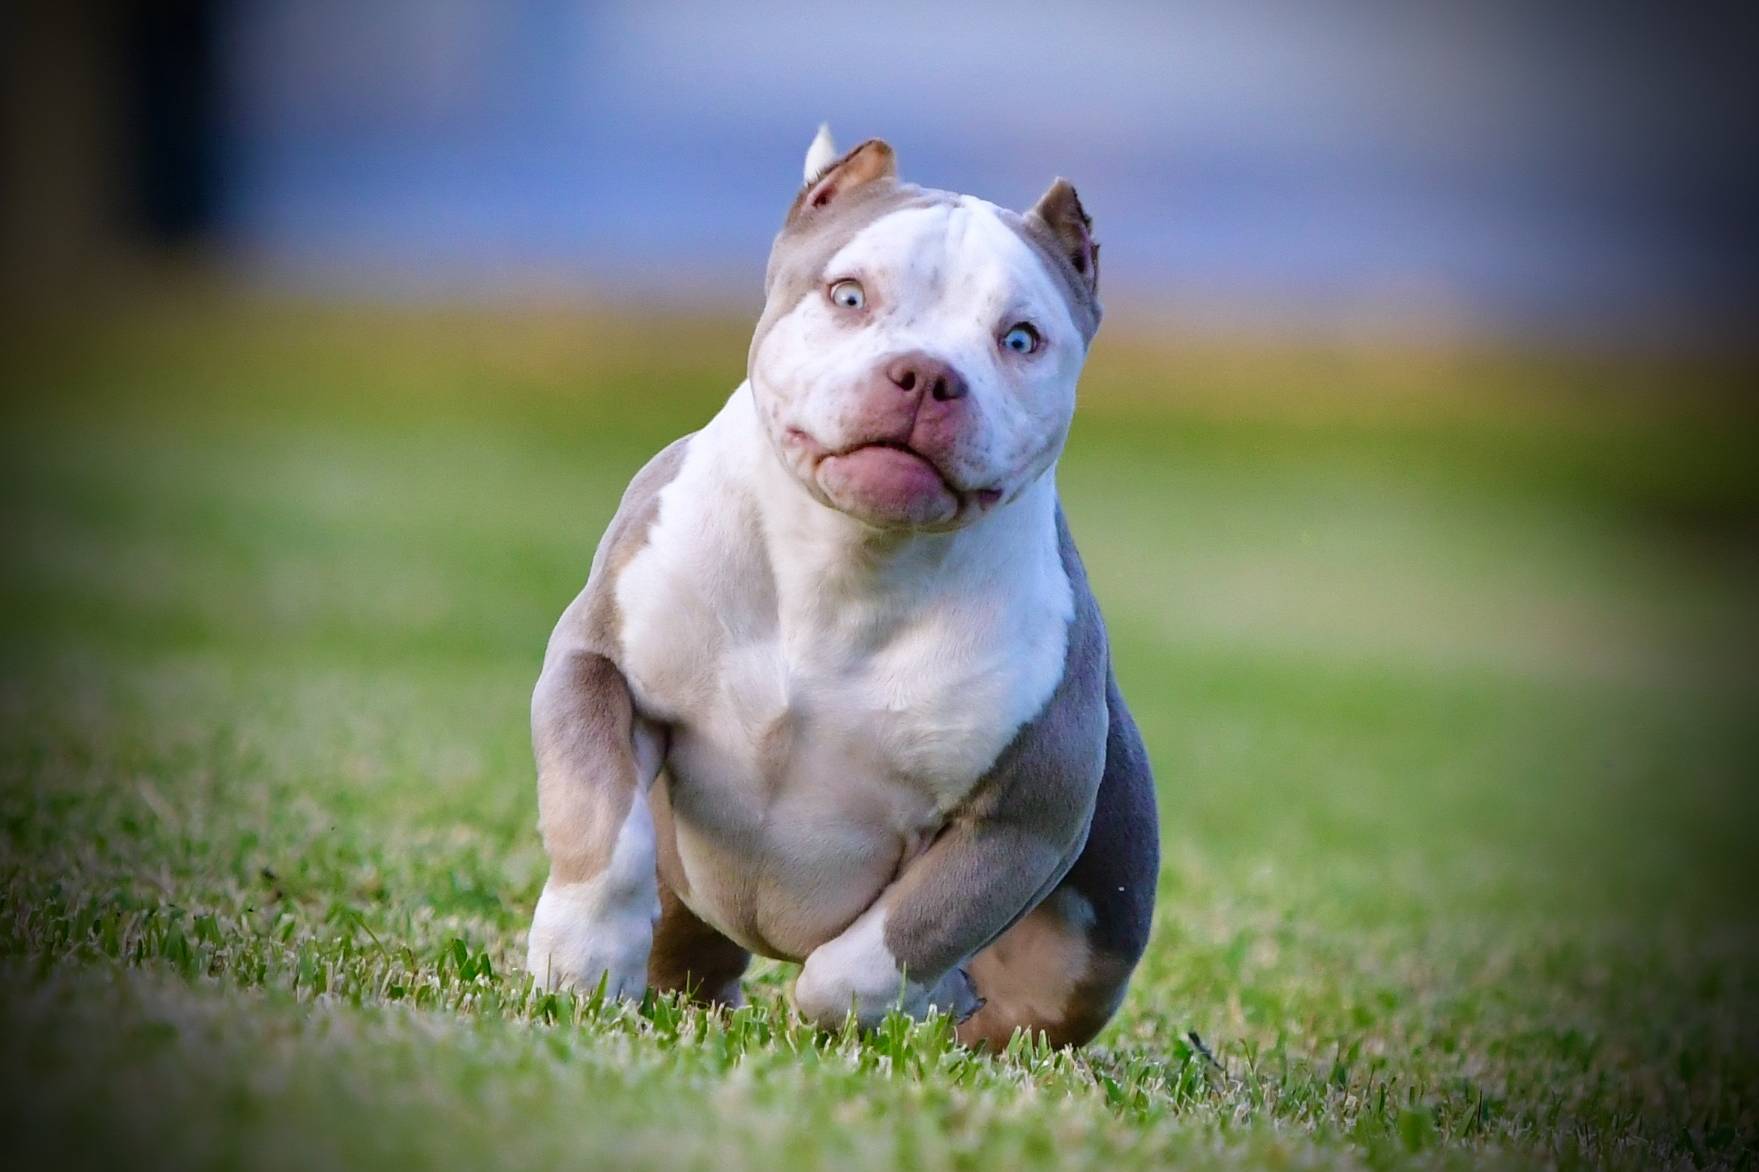 ABKC Champion, Top American Bully, Best American Bully Breeders, Top Bully Breeds, Micro American Bully, Top American Bully Kennels, Best Breeders, American Bully Kennels, Pocket American Bully Breeders